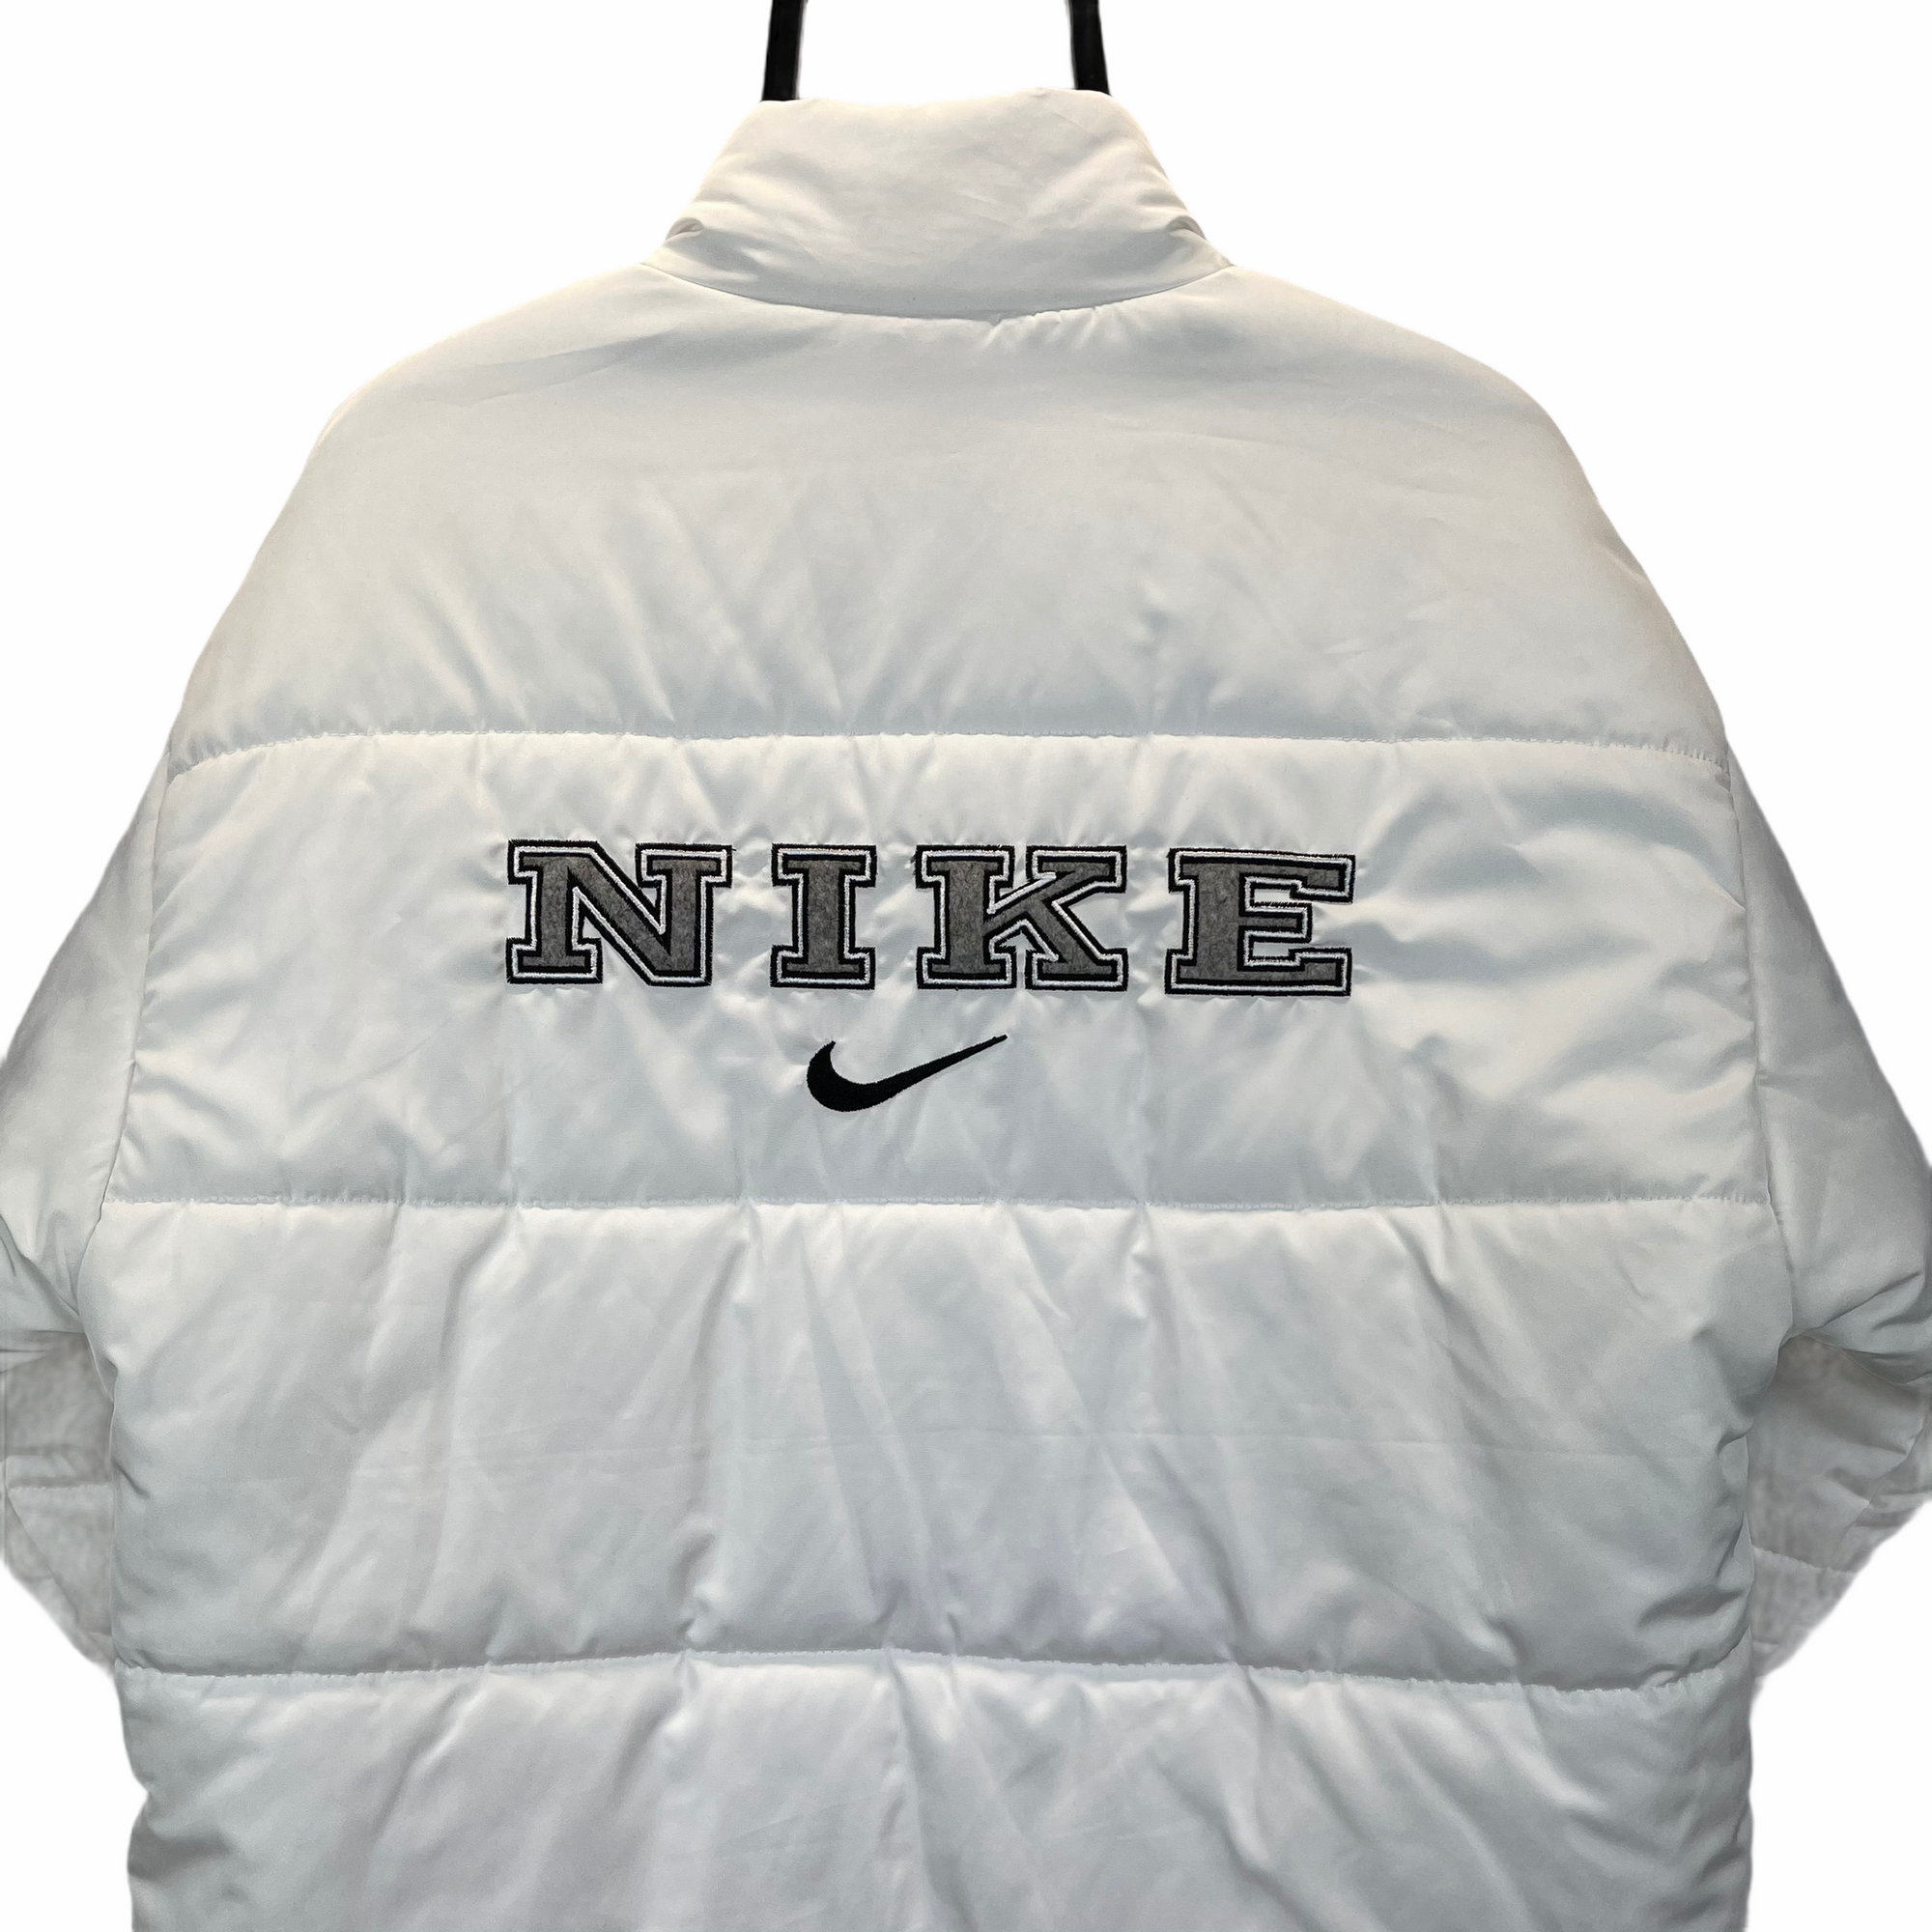 NIKE SPELLOUT PUFFER JACKET IN WHITE - MEN'S LARGE/WOMEN'S XL